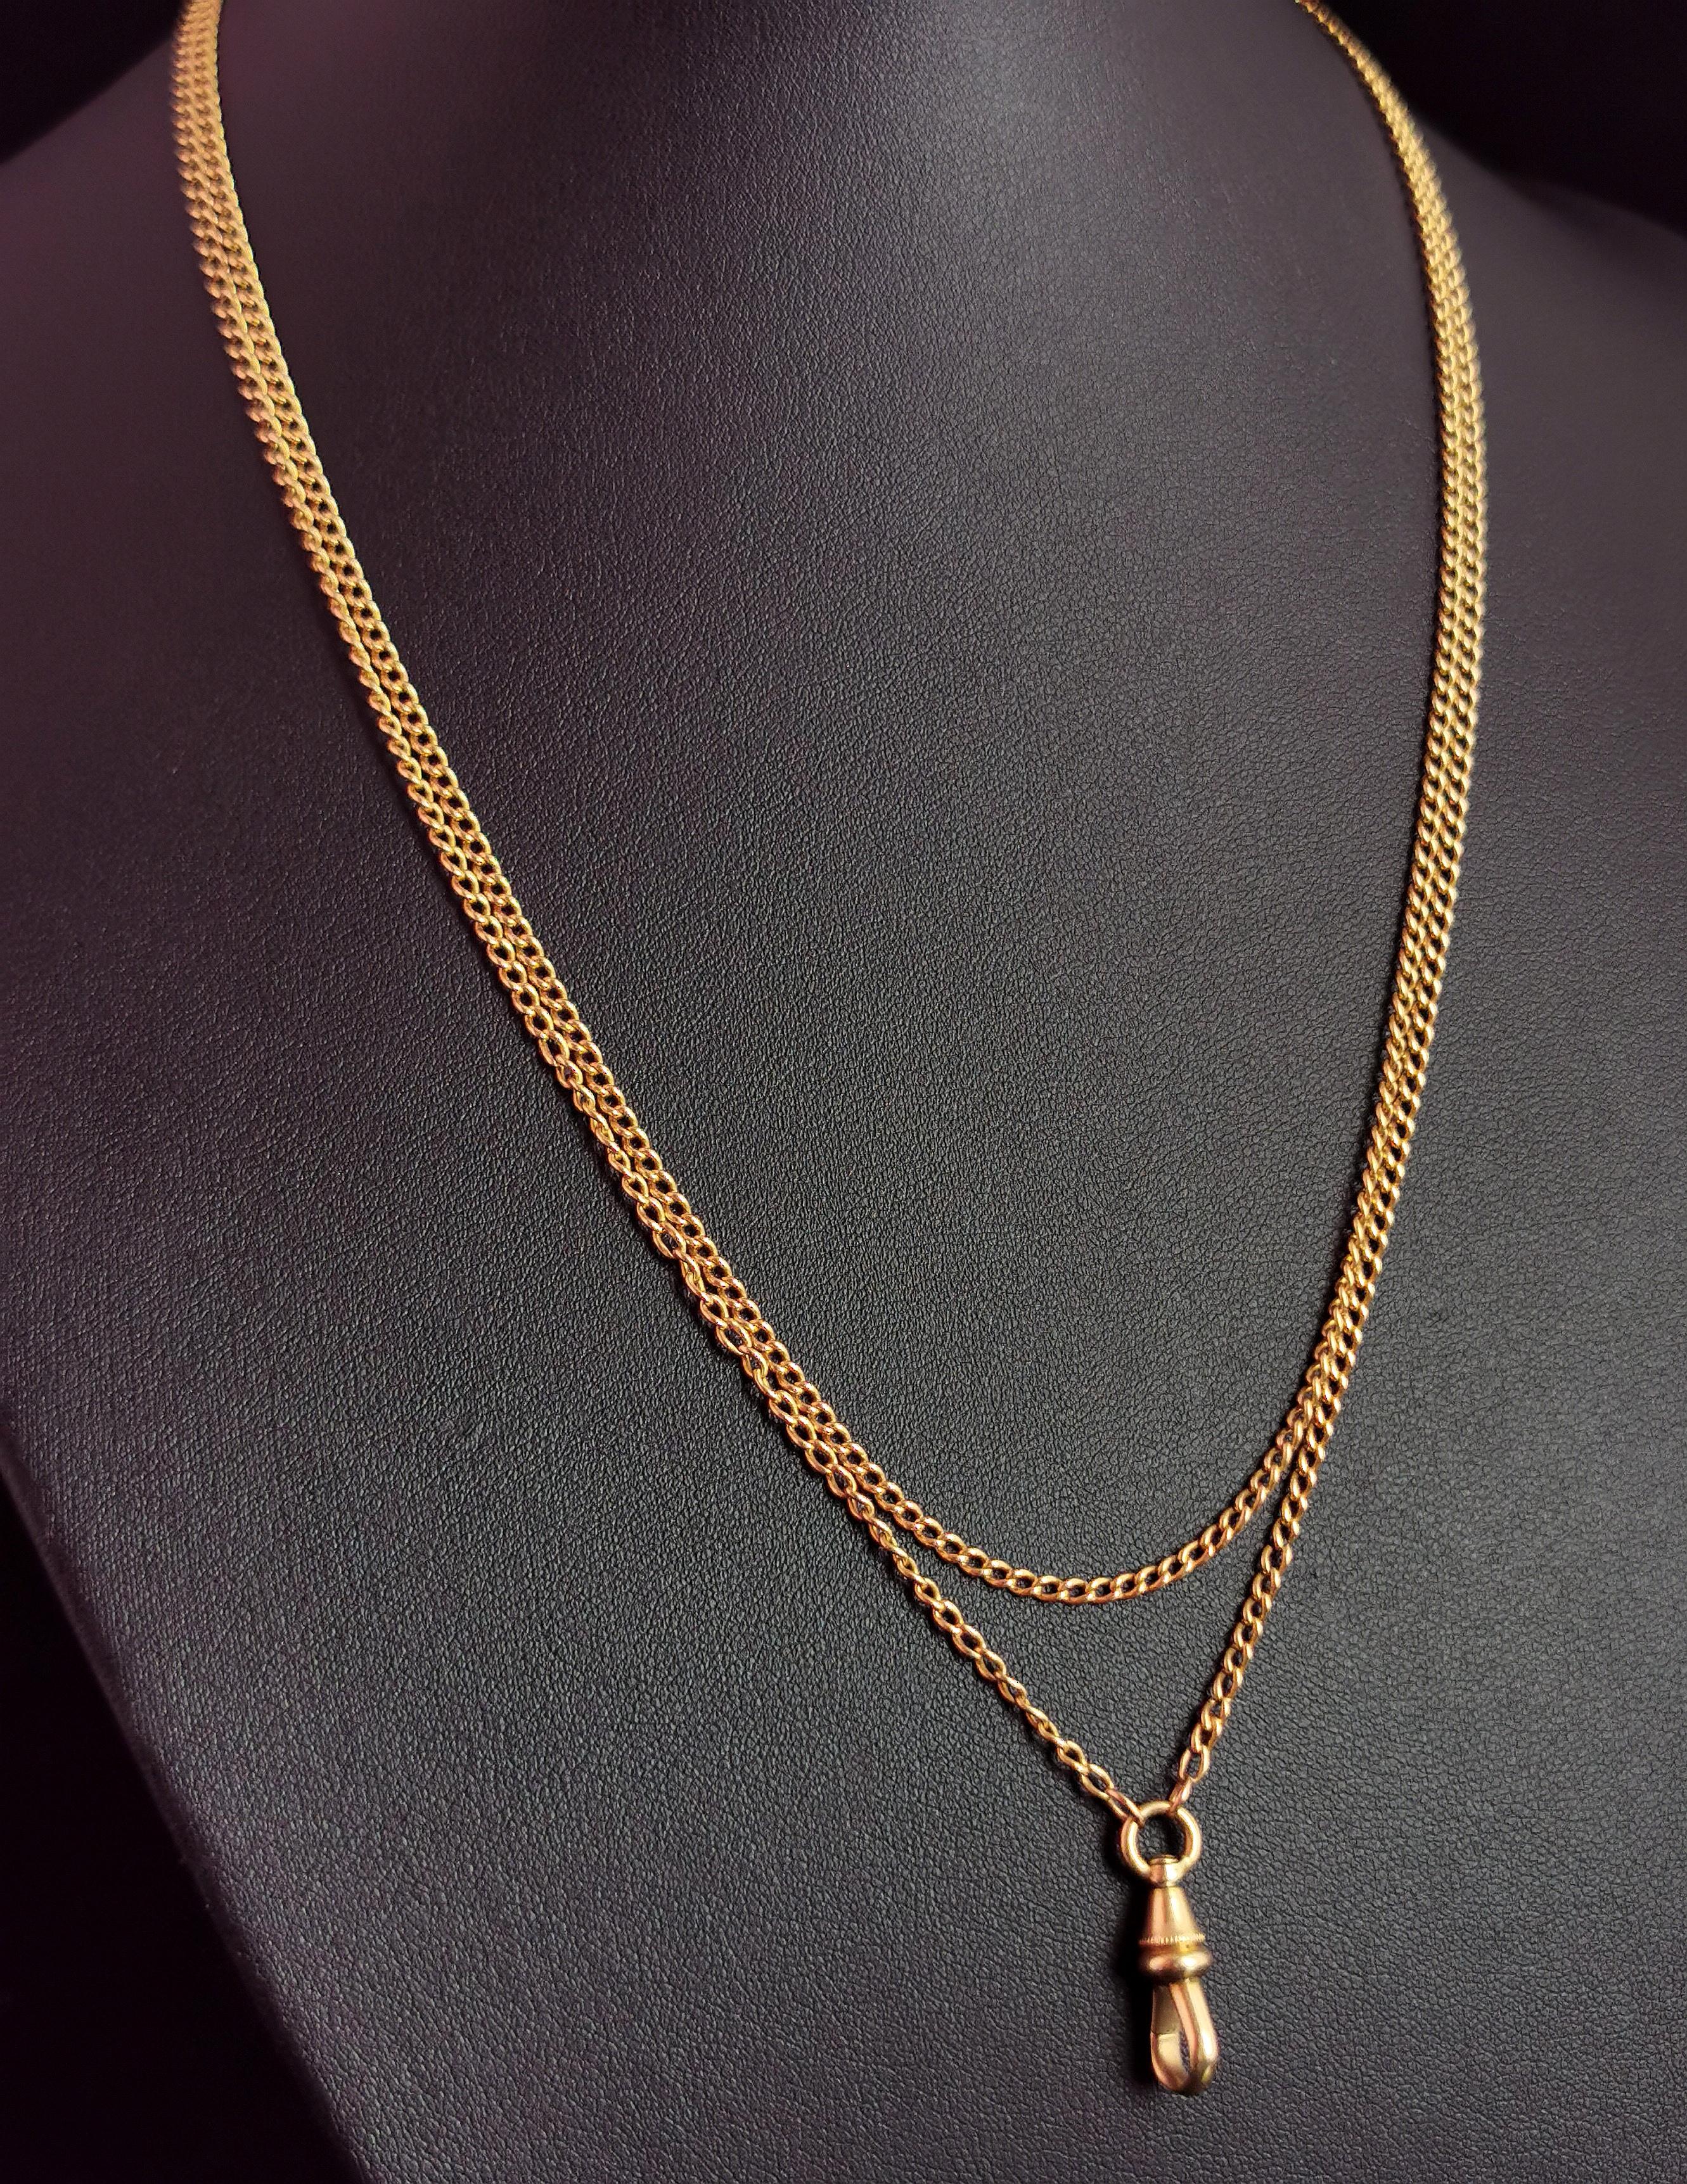 Antique 18k Yellow Gold Longuard Chain Necklace, Victorian 1